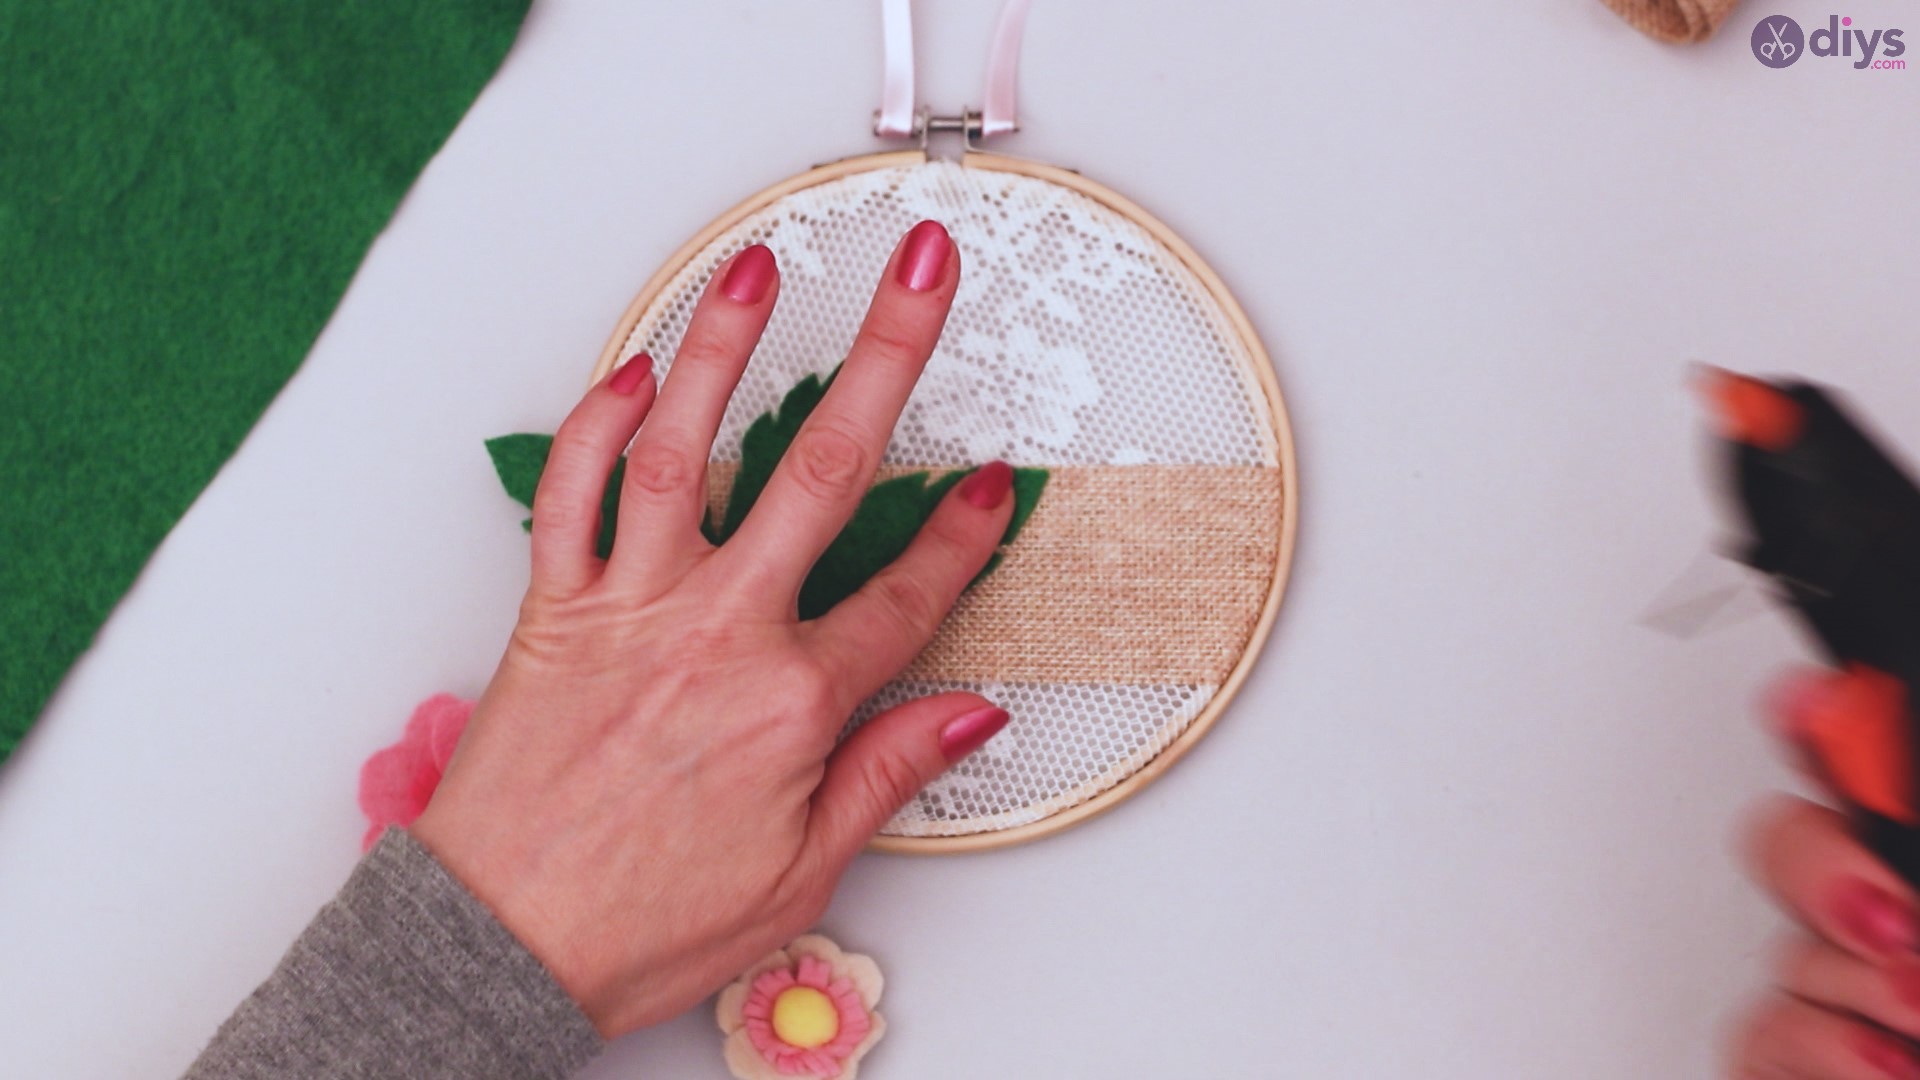 Diy embroidery hoop wall decor tutorial step by step (59)